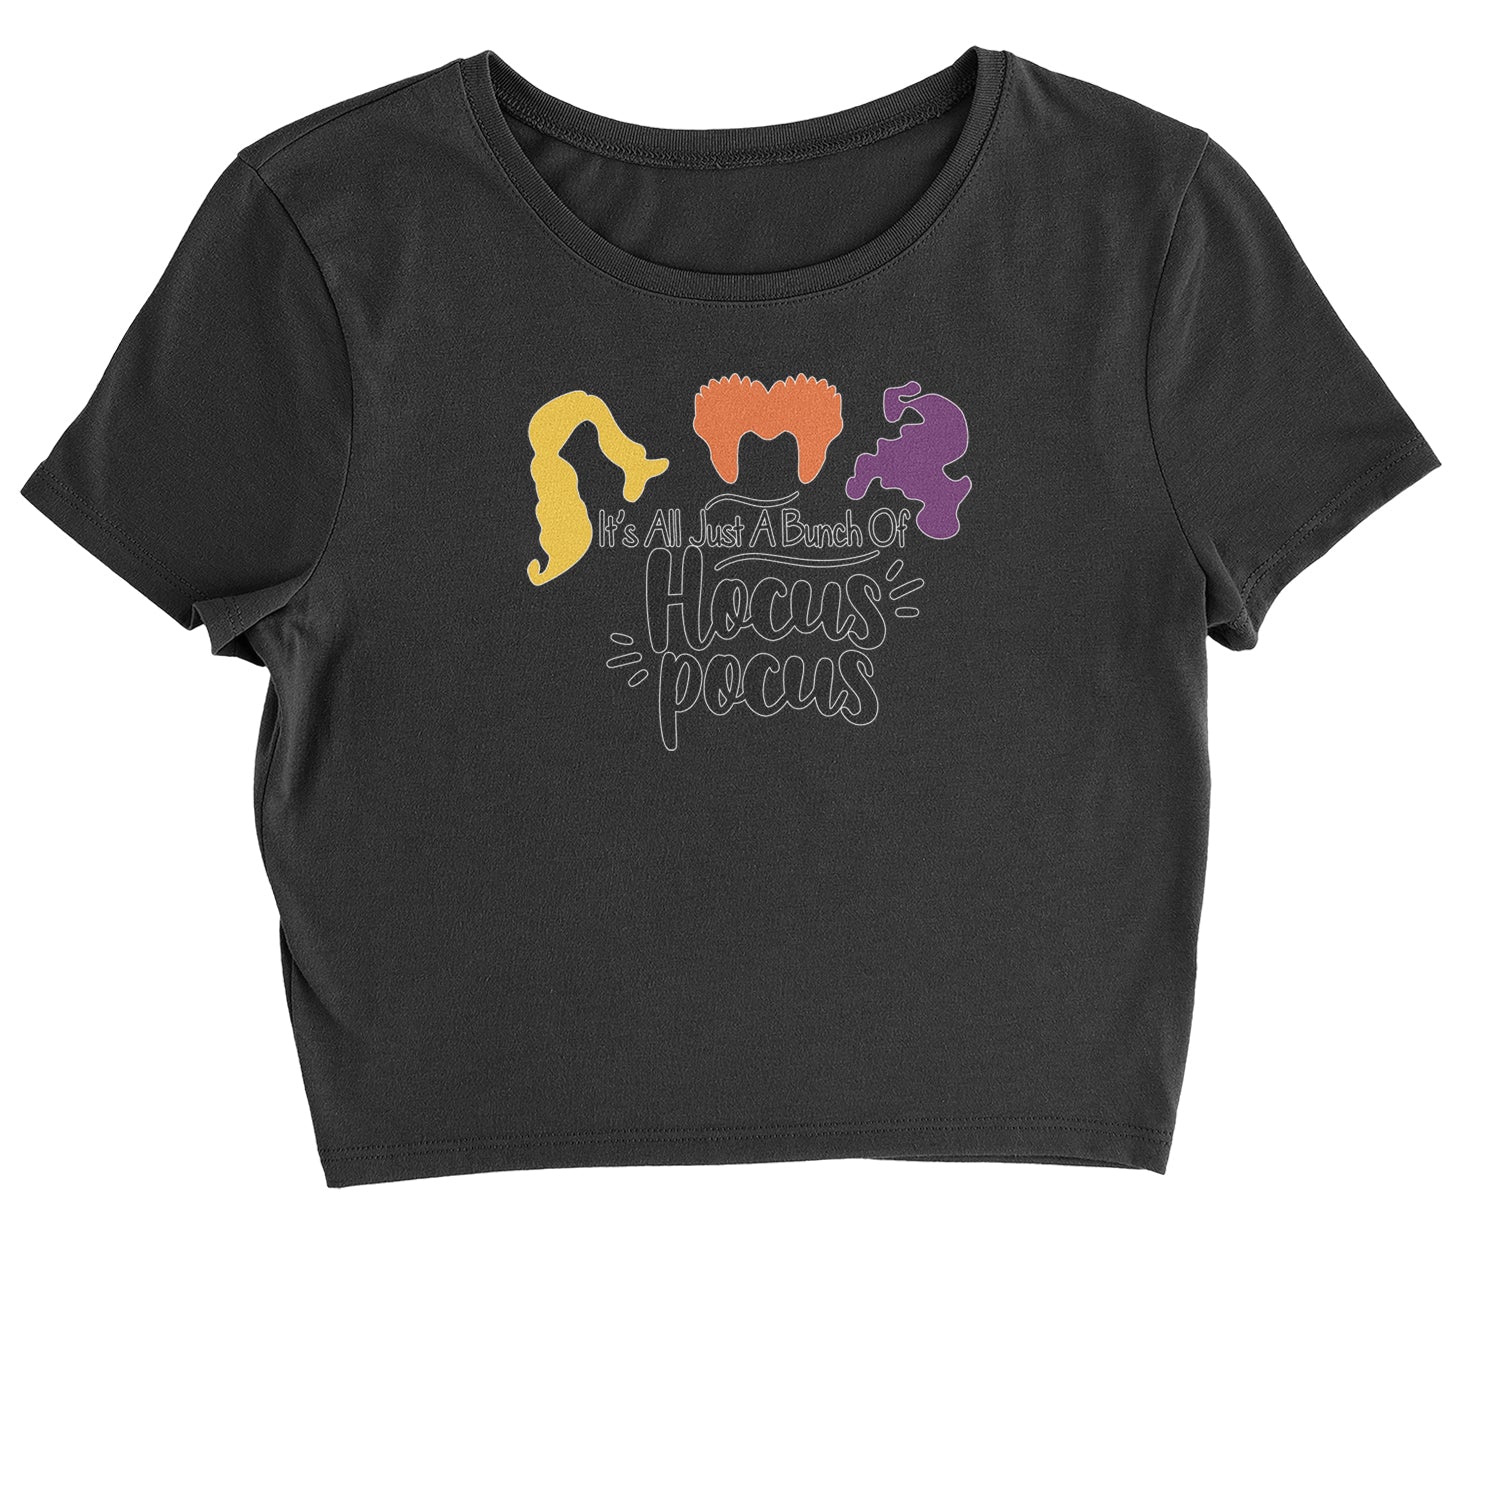 It's Just A Bunch Of Hocus Pocus Cropped T-Shirt descendants, enchanted, eve, hallows, hocus, or, pocus, sanderson, sisters, treat, trick, witches by Expression Tees